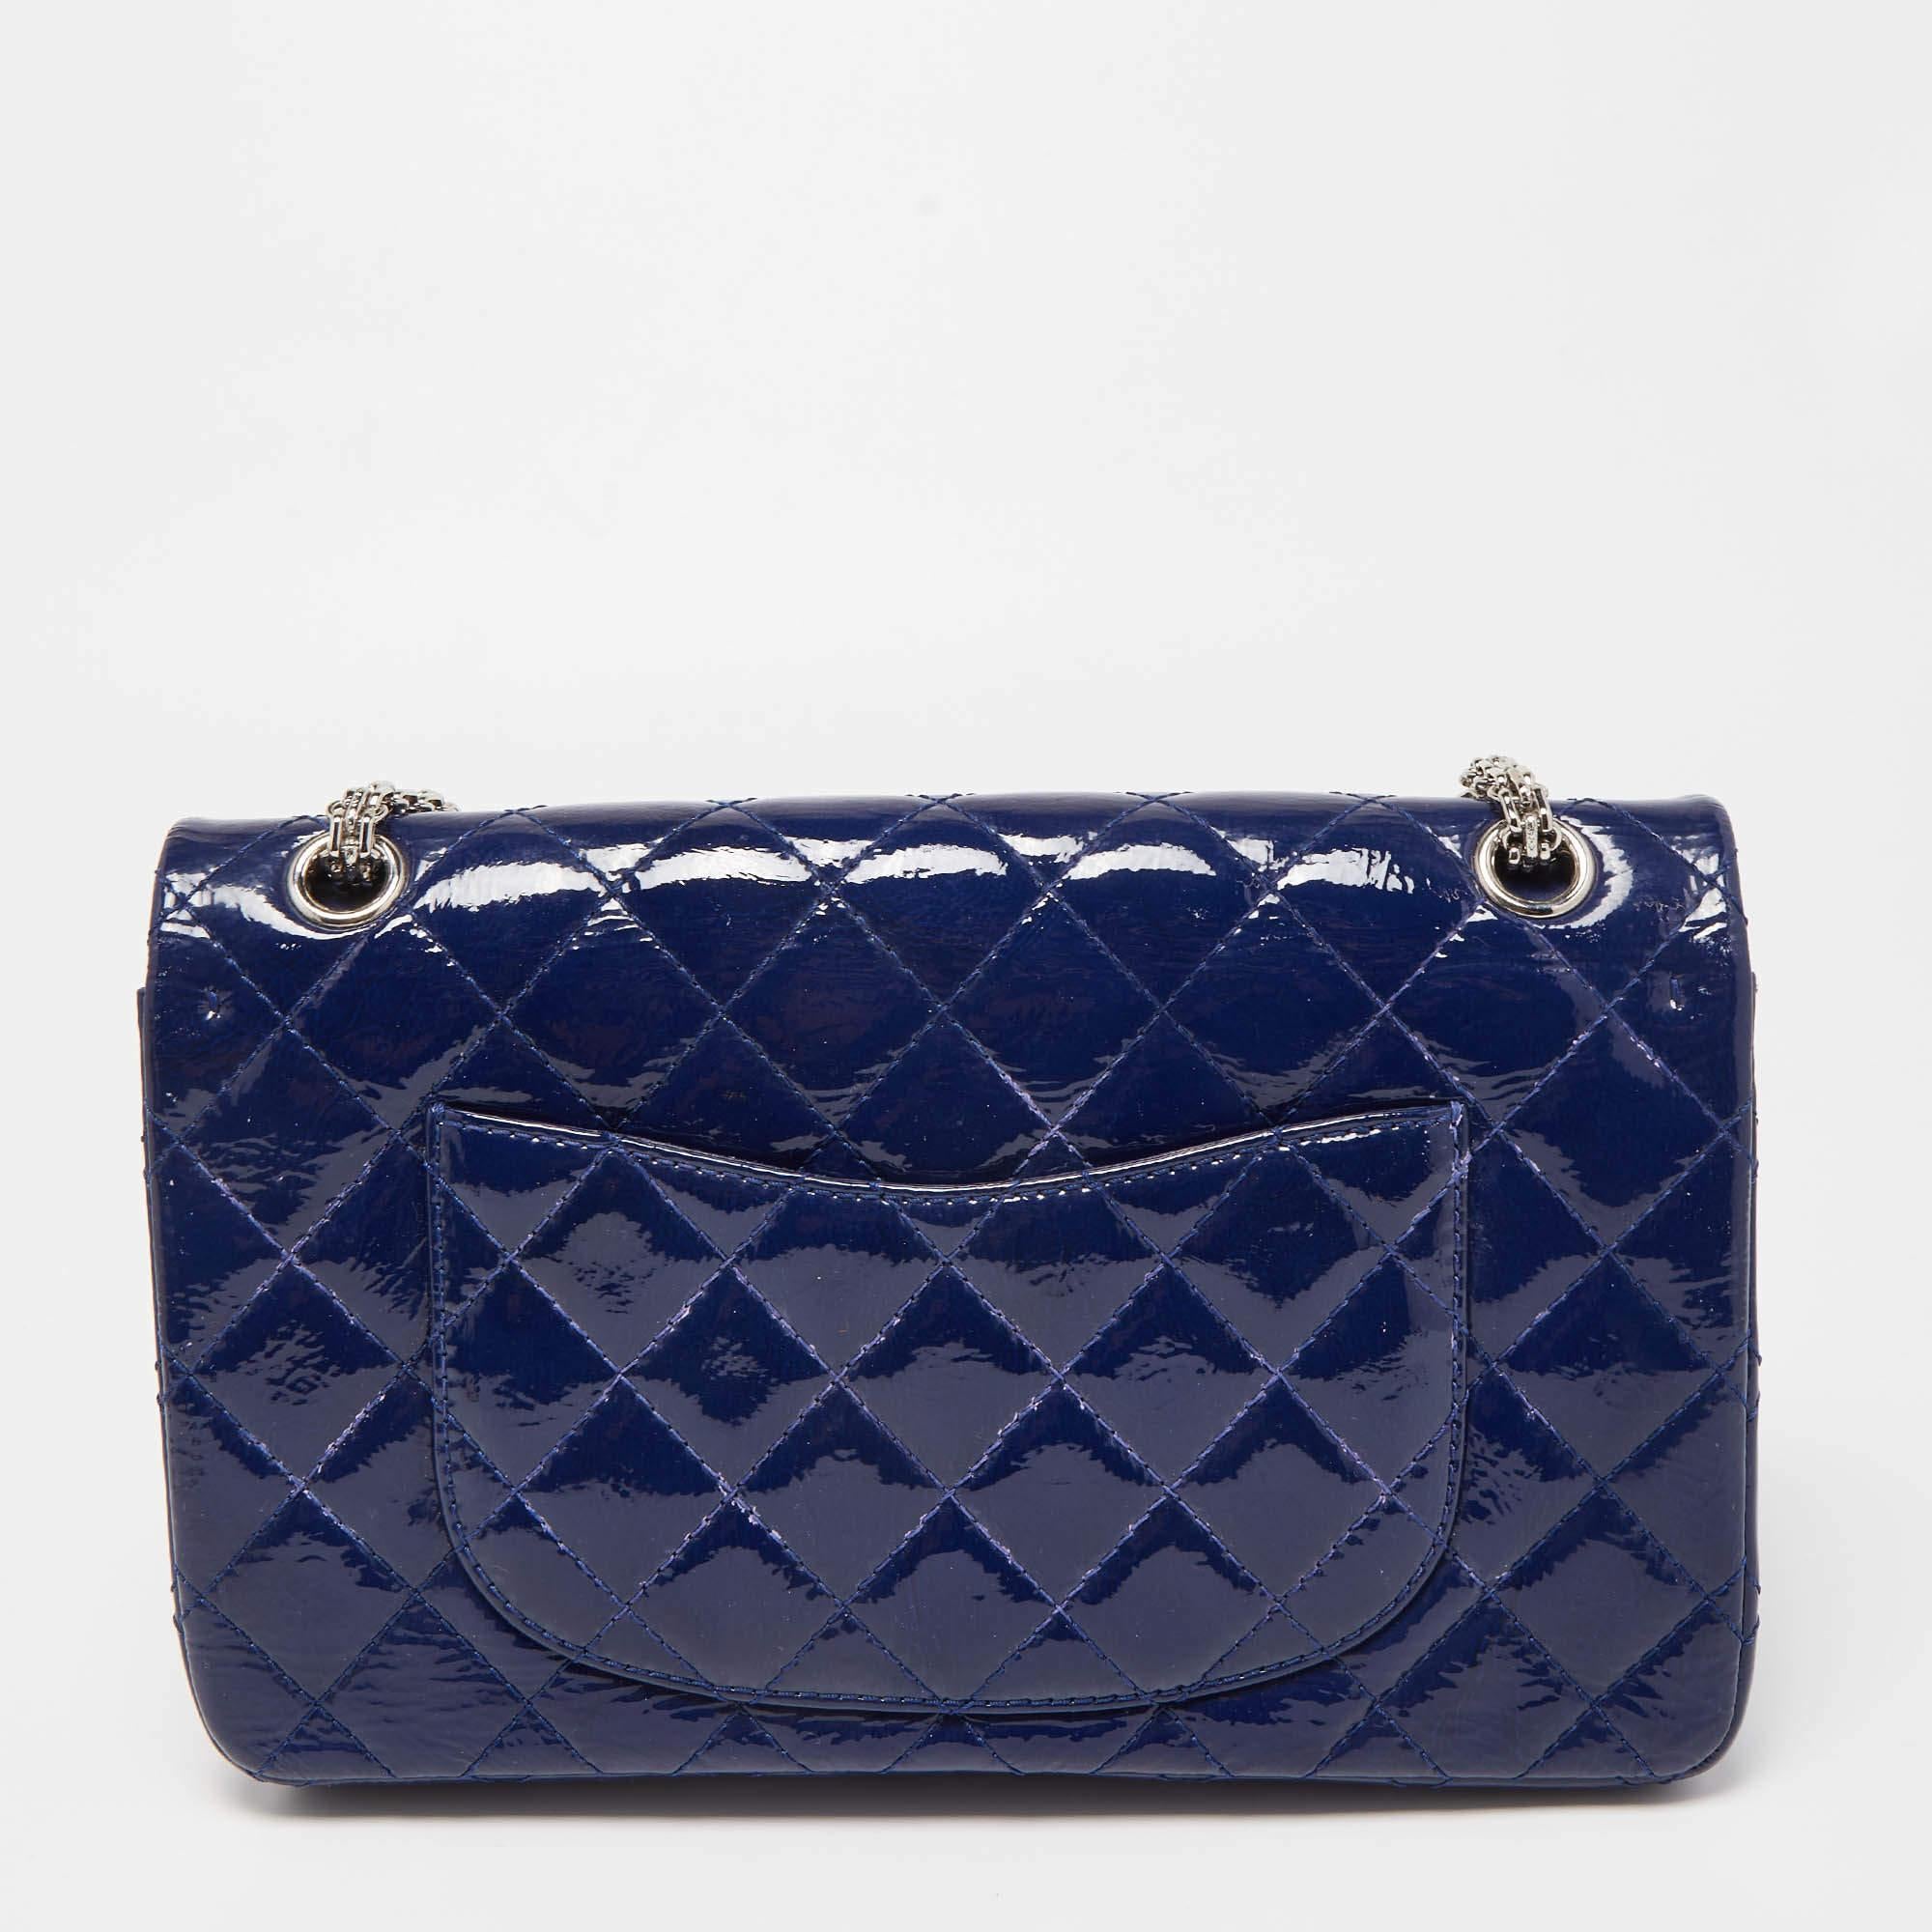 Chanel Blue Quilted Patent Leather Reissue 2.55 Classic 226 Flap Bag For Sale 9